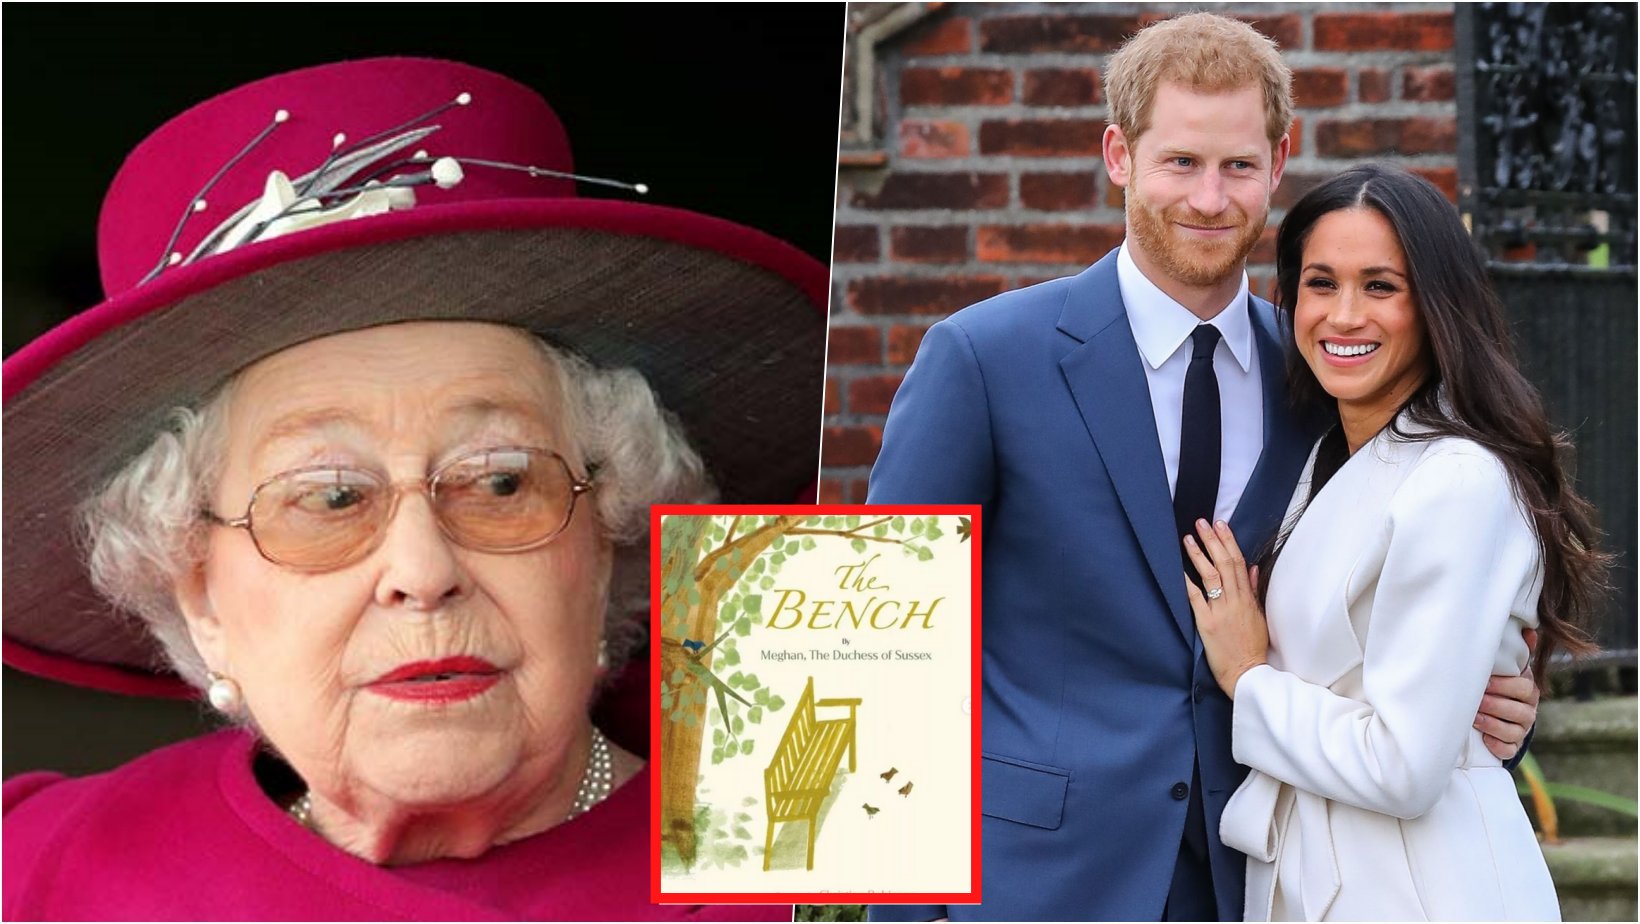 small joys thumbnail.png?resize=1200,630 - The Queen ‘Will Contact Publishers’ To Erase Meghan Markle’s Royal Title From Her New Book